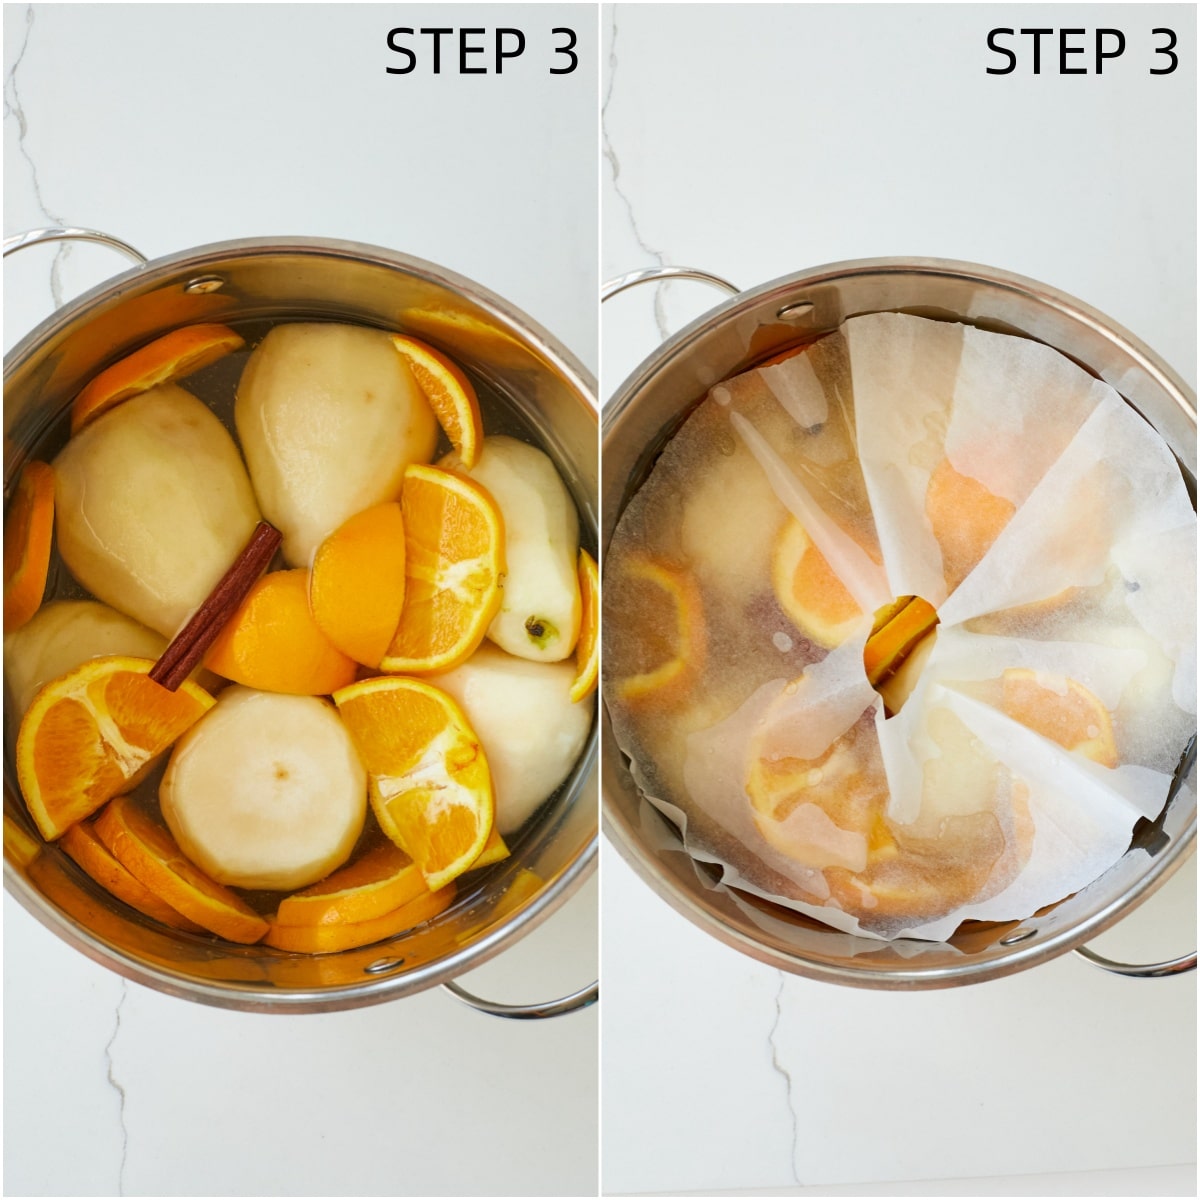 Step-by-step instructions on how to make Poached Pears: Add the pears to the pot with orange slices and spices, then cut a circle of parchment paper large enough to fit in the pot on top of the pears. Cut a small circle in the middle for venting and place it on top of the pears in the water.